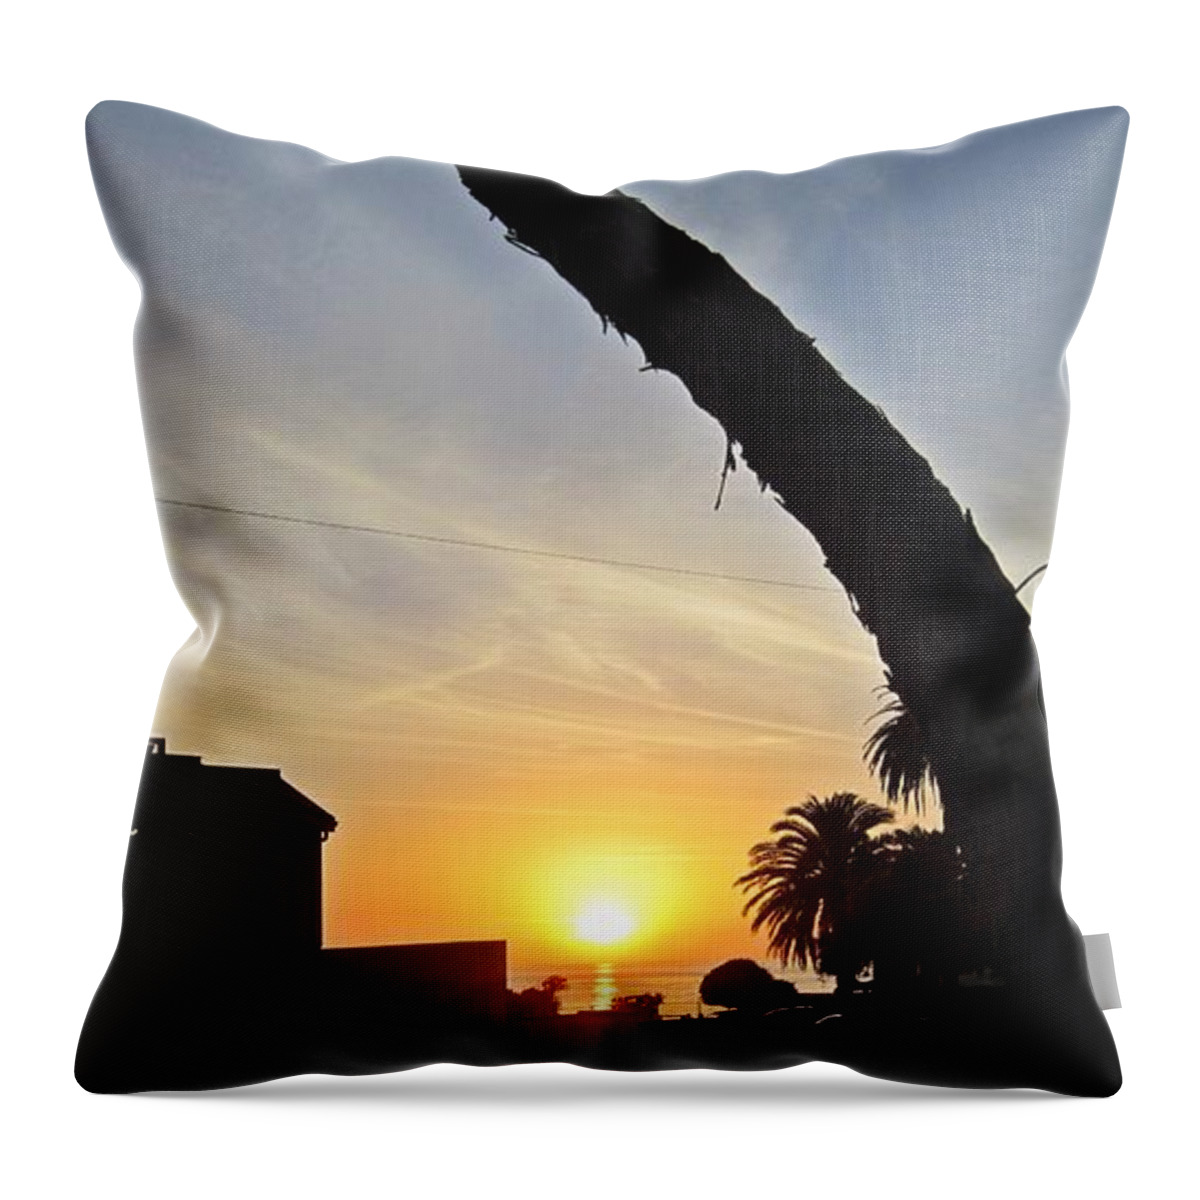 Linear Clouds Throw Pillow featuring the photograph Linear Clouds by Dan Twyman